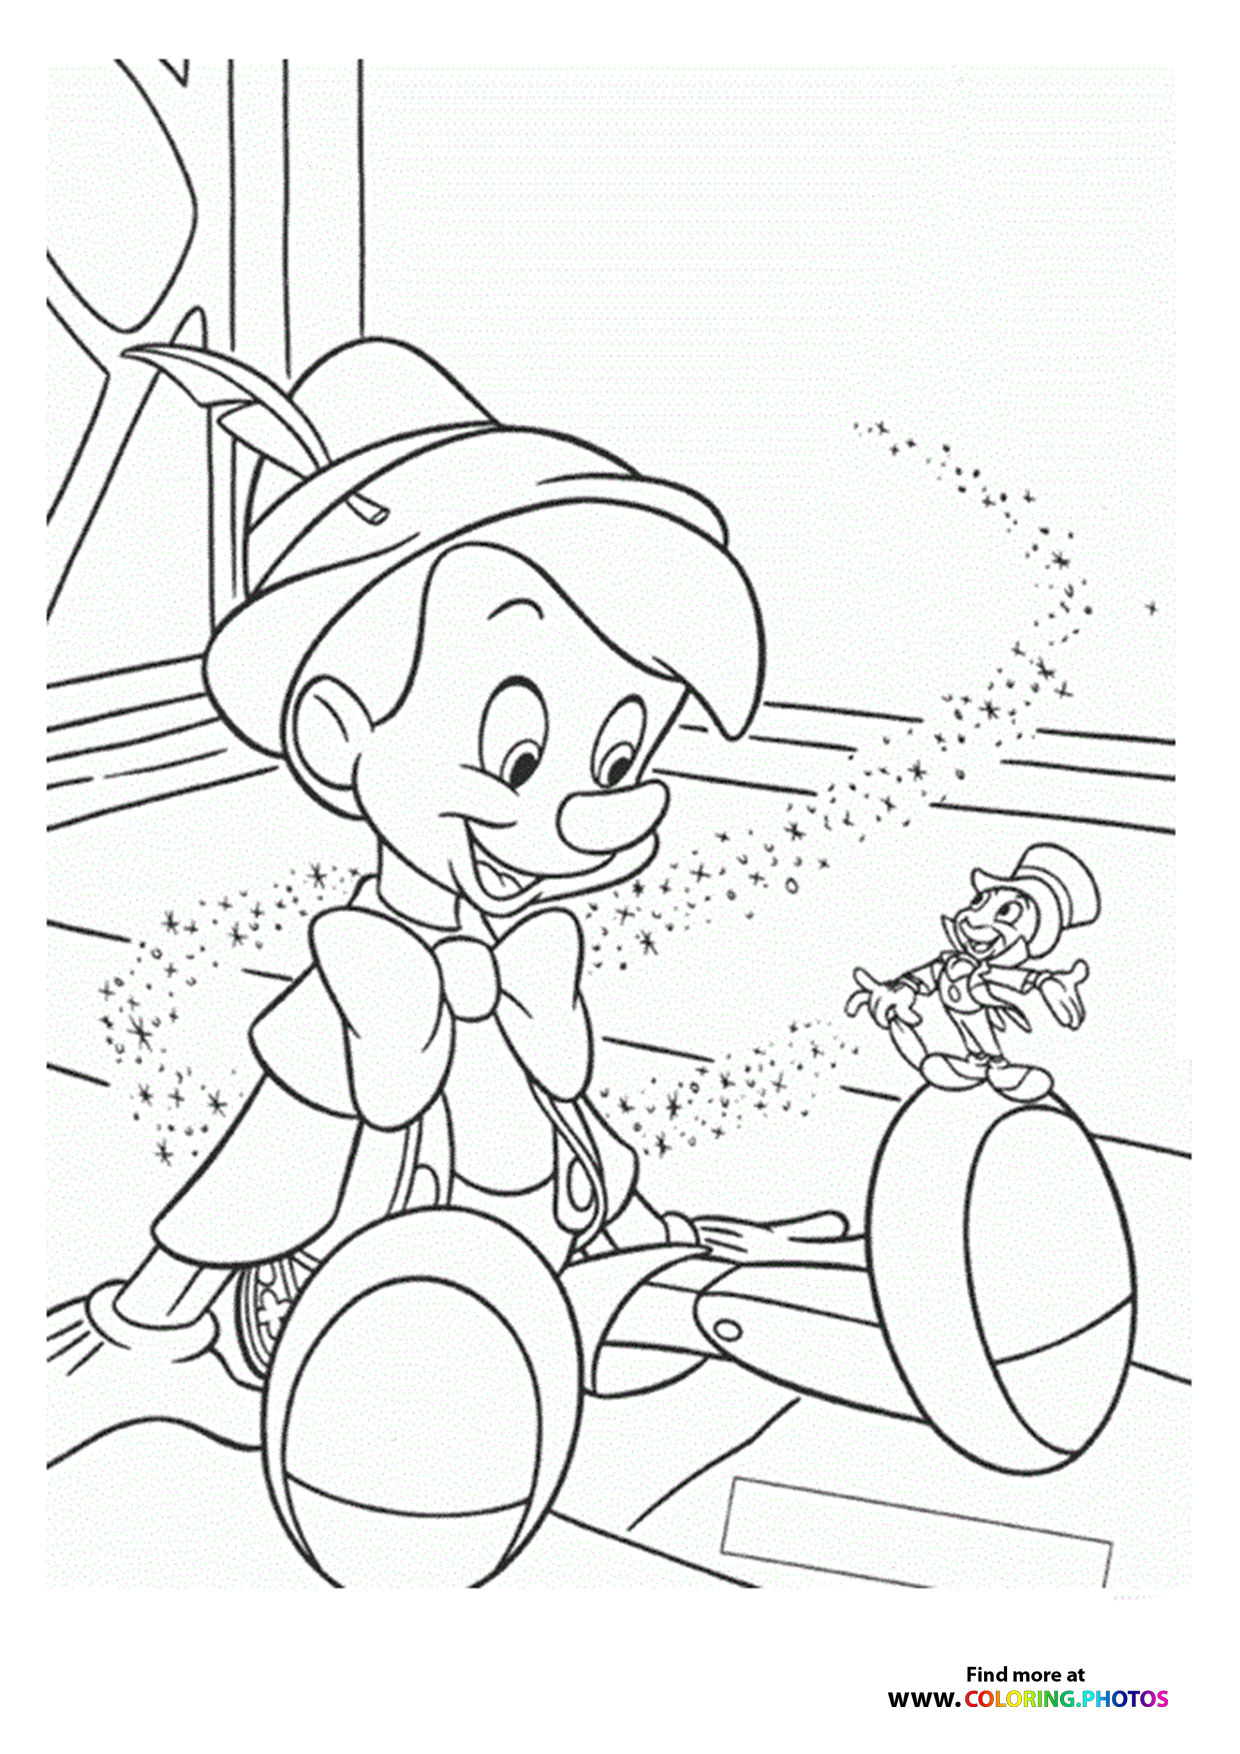 Pinocchio with magic - Coloring Pages for kids